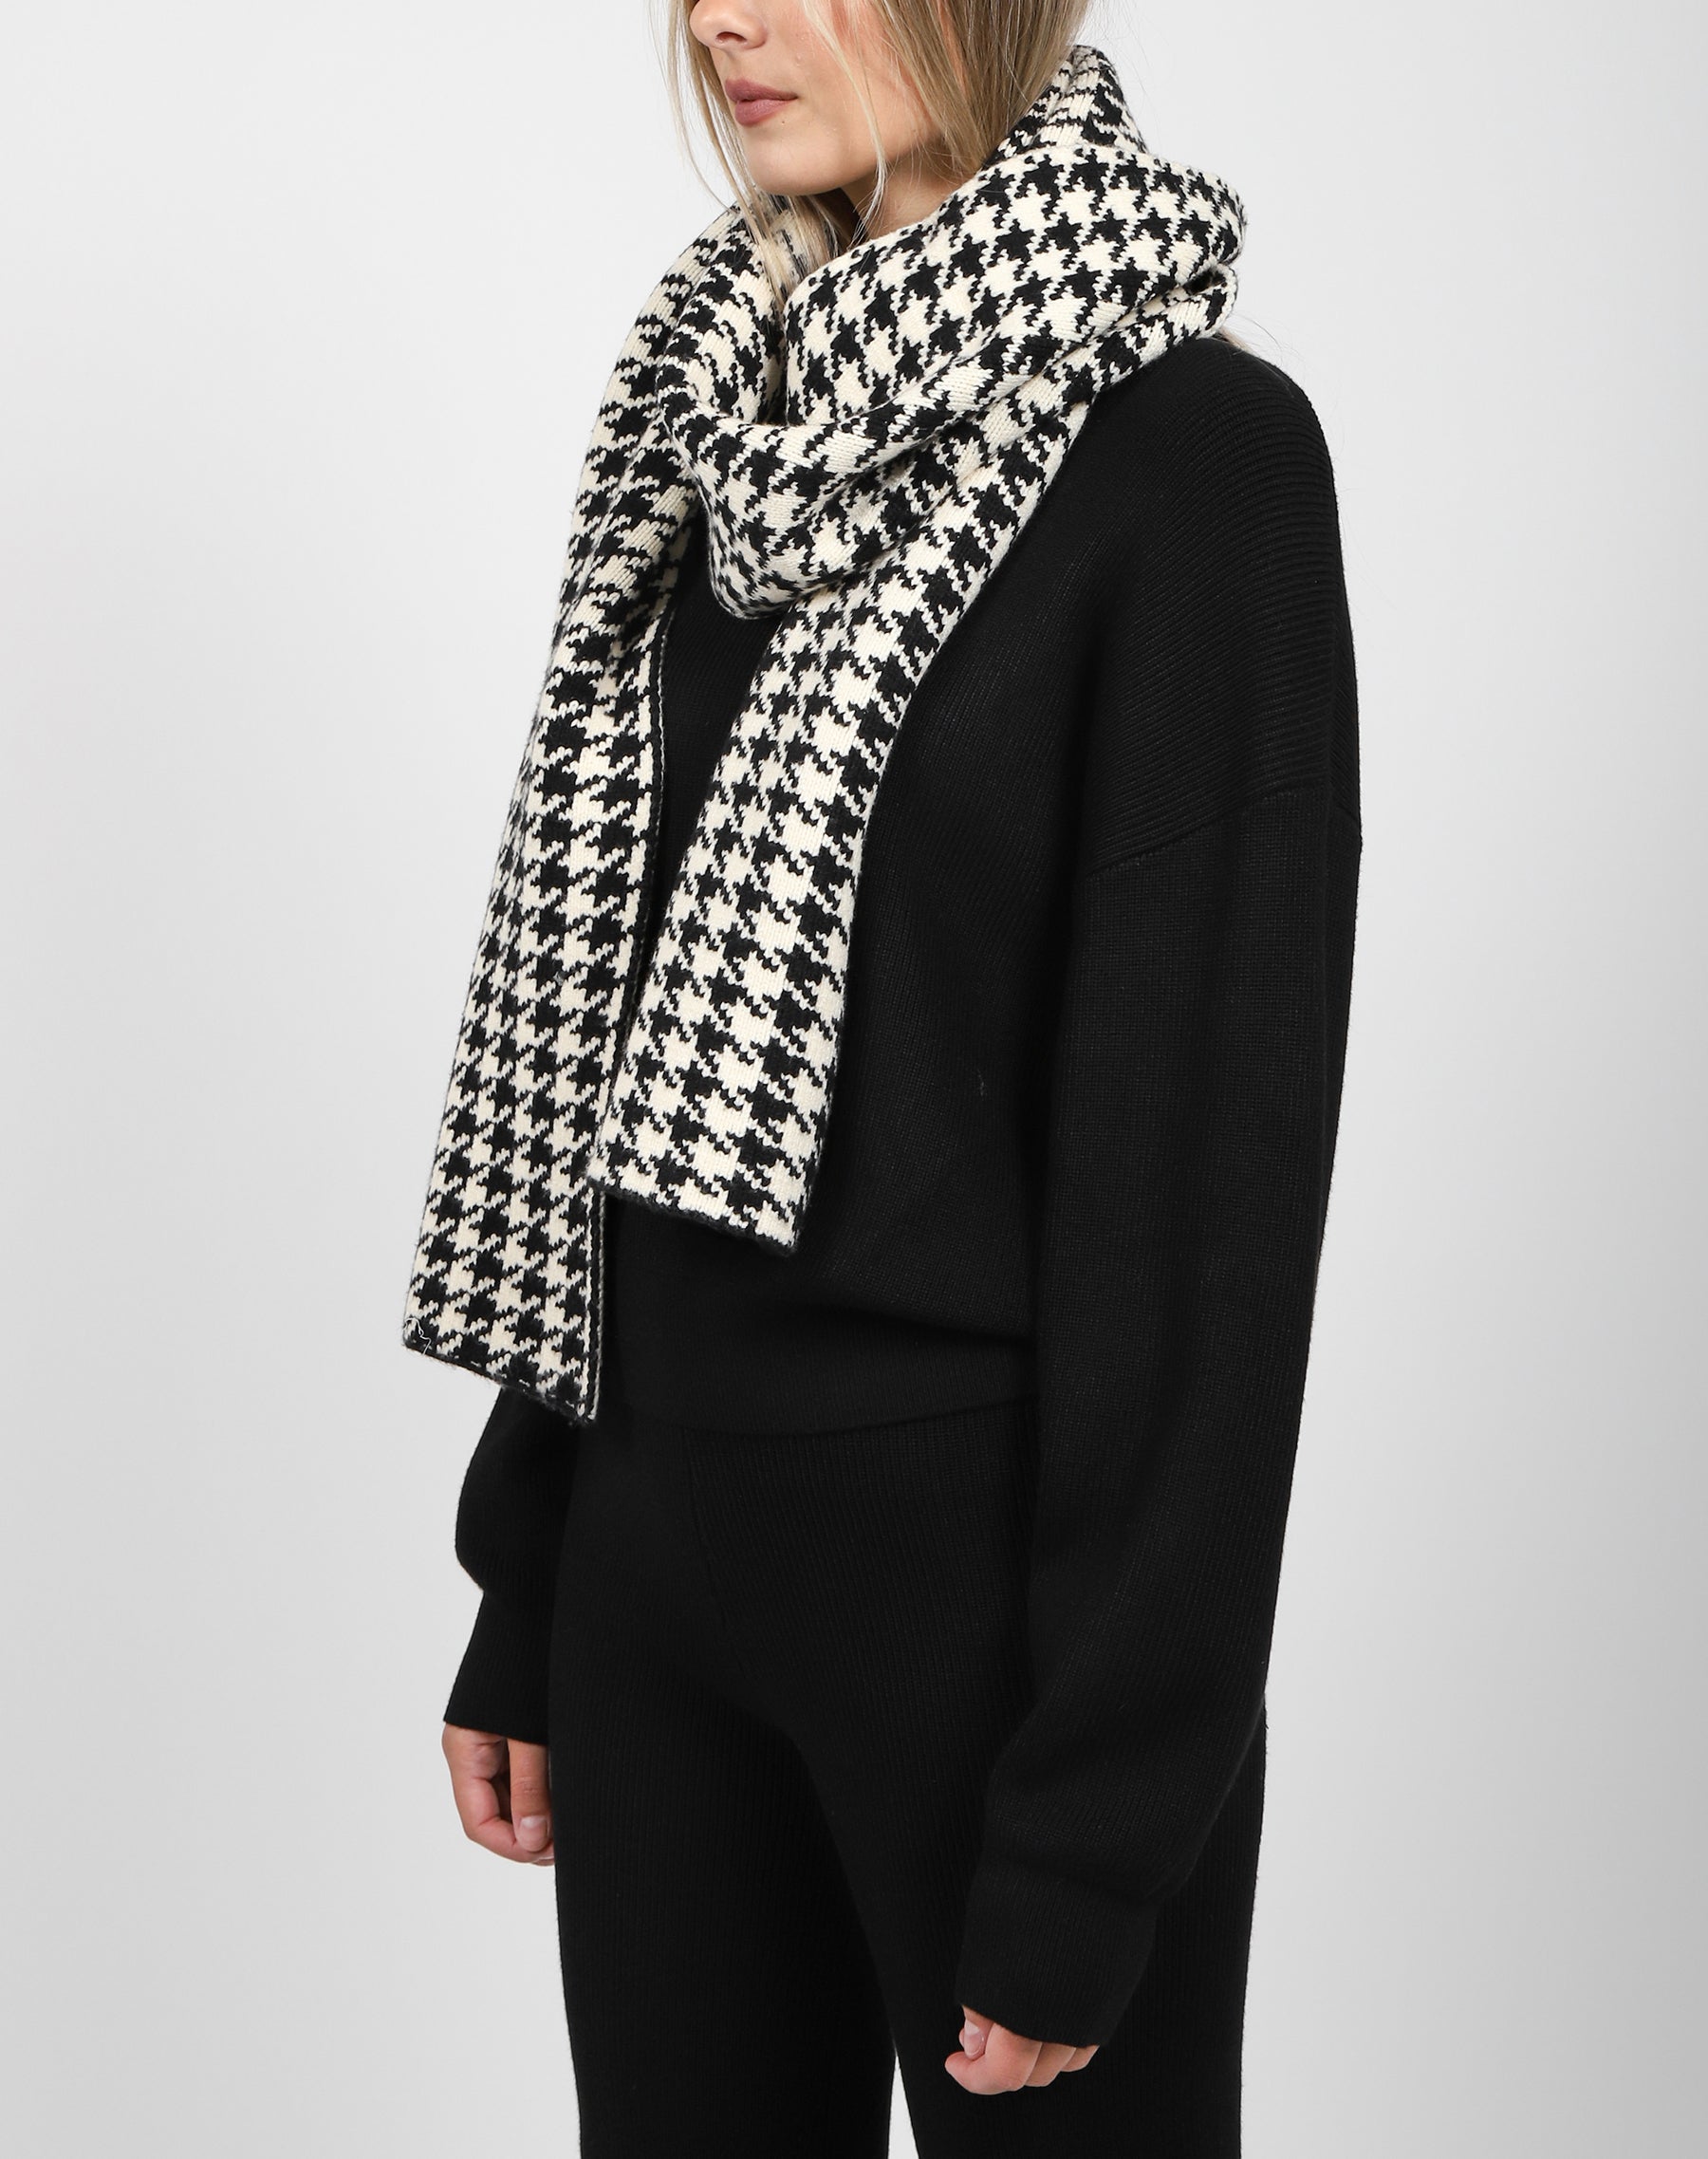 The Houndstooth Blanket Scarf | Black and Cream